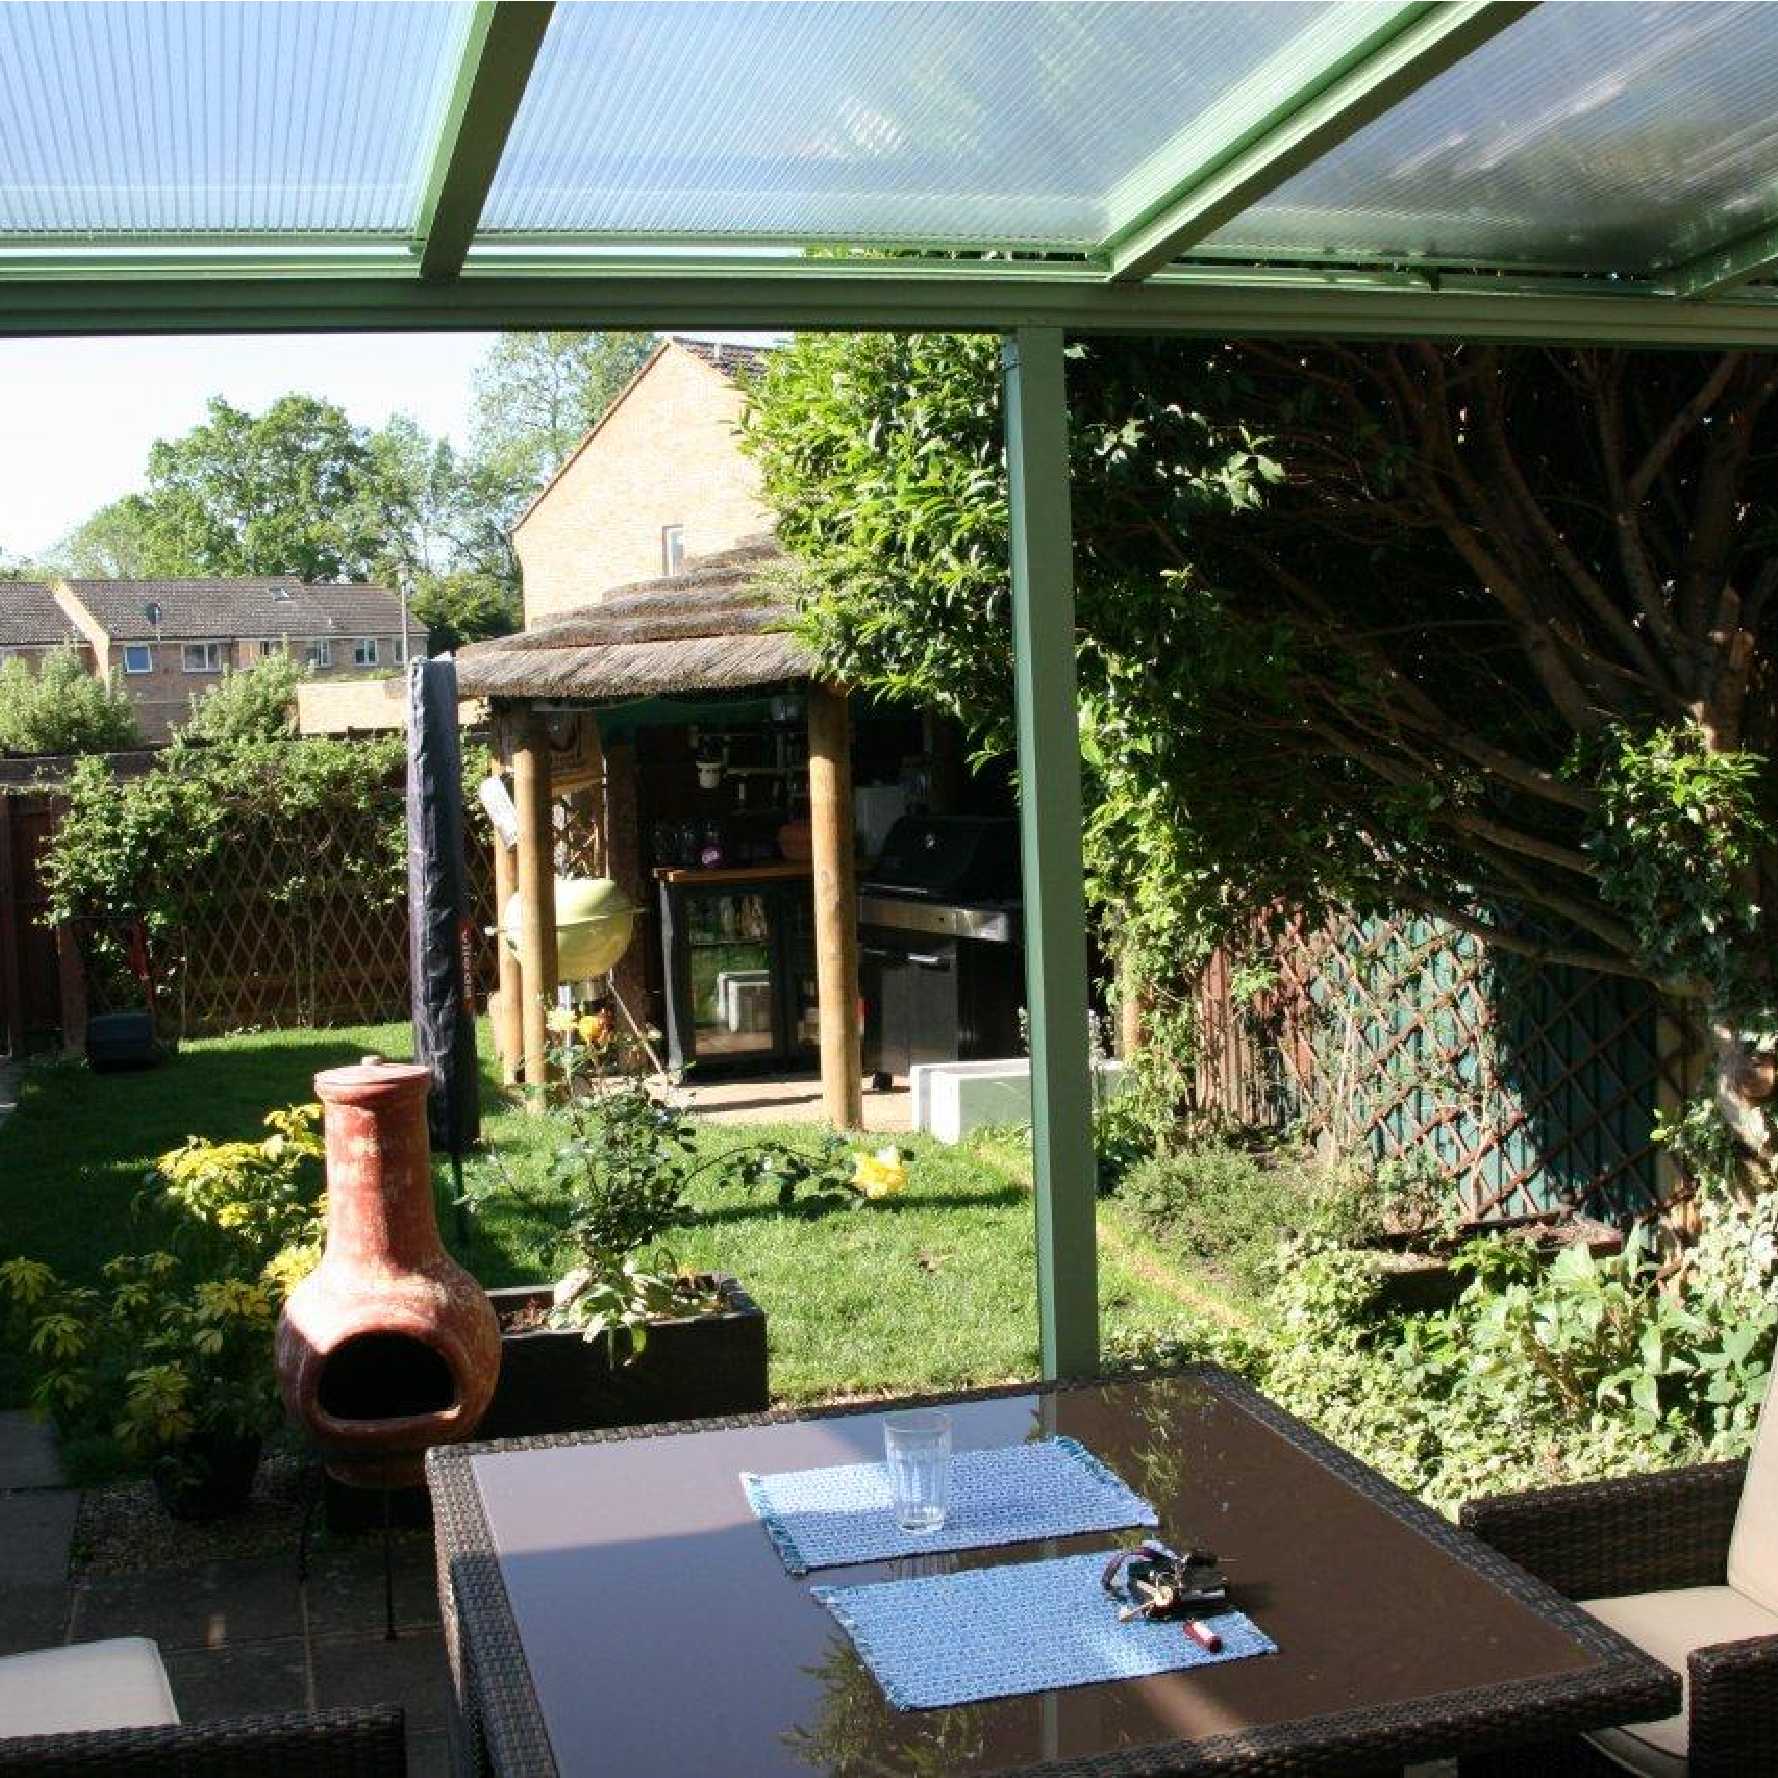 Affordable Omega Smart Lean-To Canopy, White with 16mm Polycarbonate Glazing - 4.2m (W) x 1.5m (P), (3) Supporting Posts